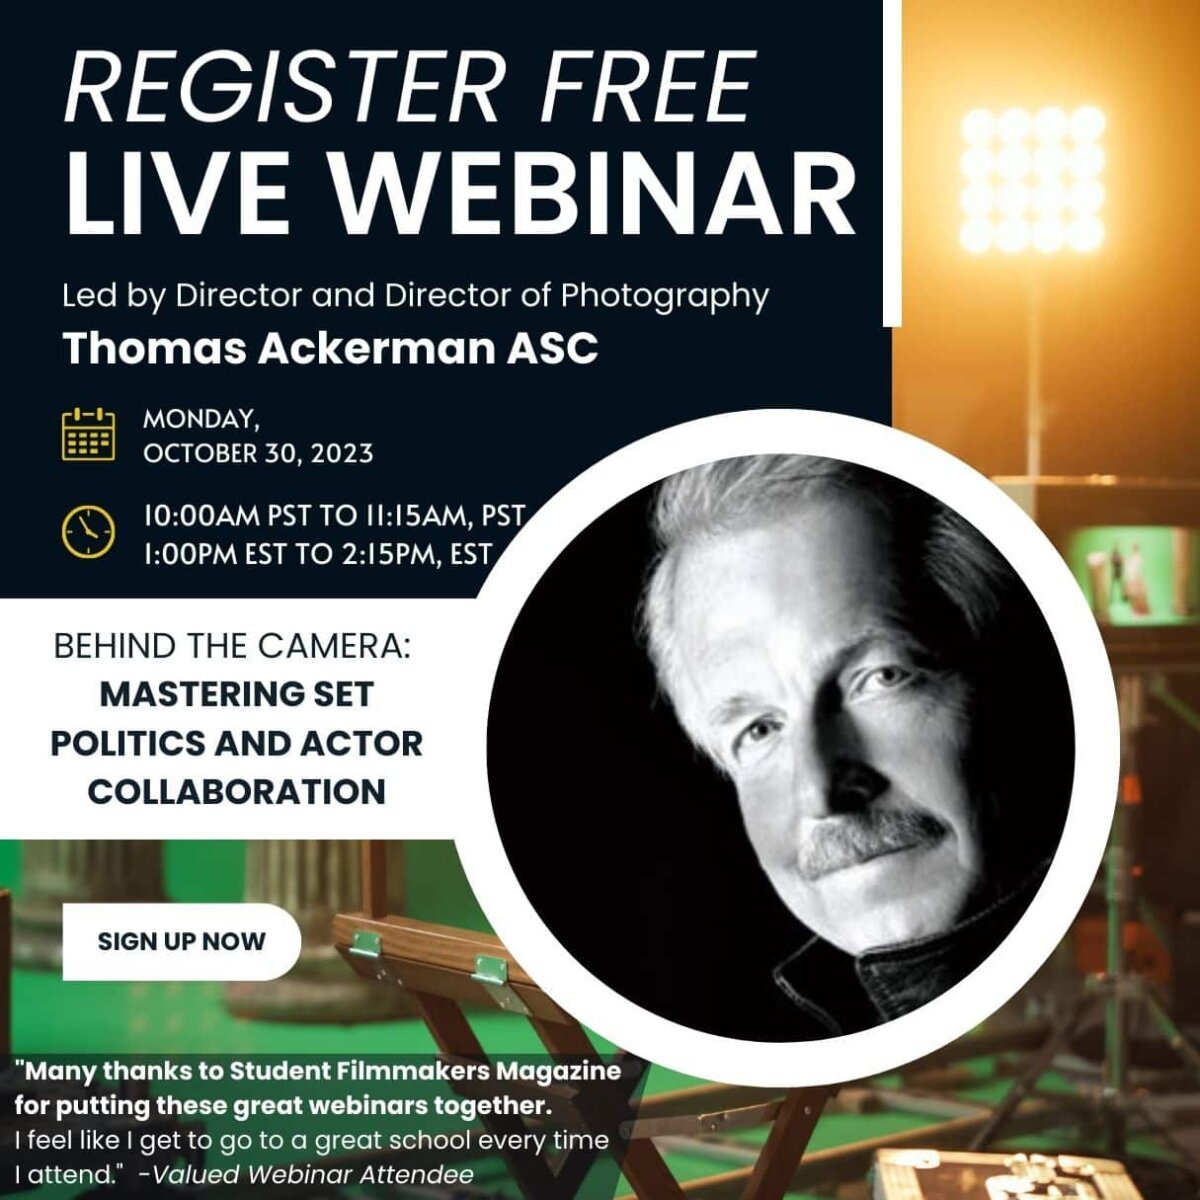 REGISTER FREE! LIVE WEBINAR | Behind the Camera: Mastering Set Politics and Actor Collaboration with Director and Director of Photography Thomas Ackerman ASC